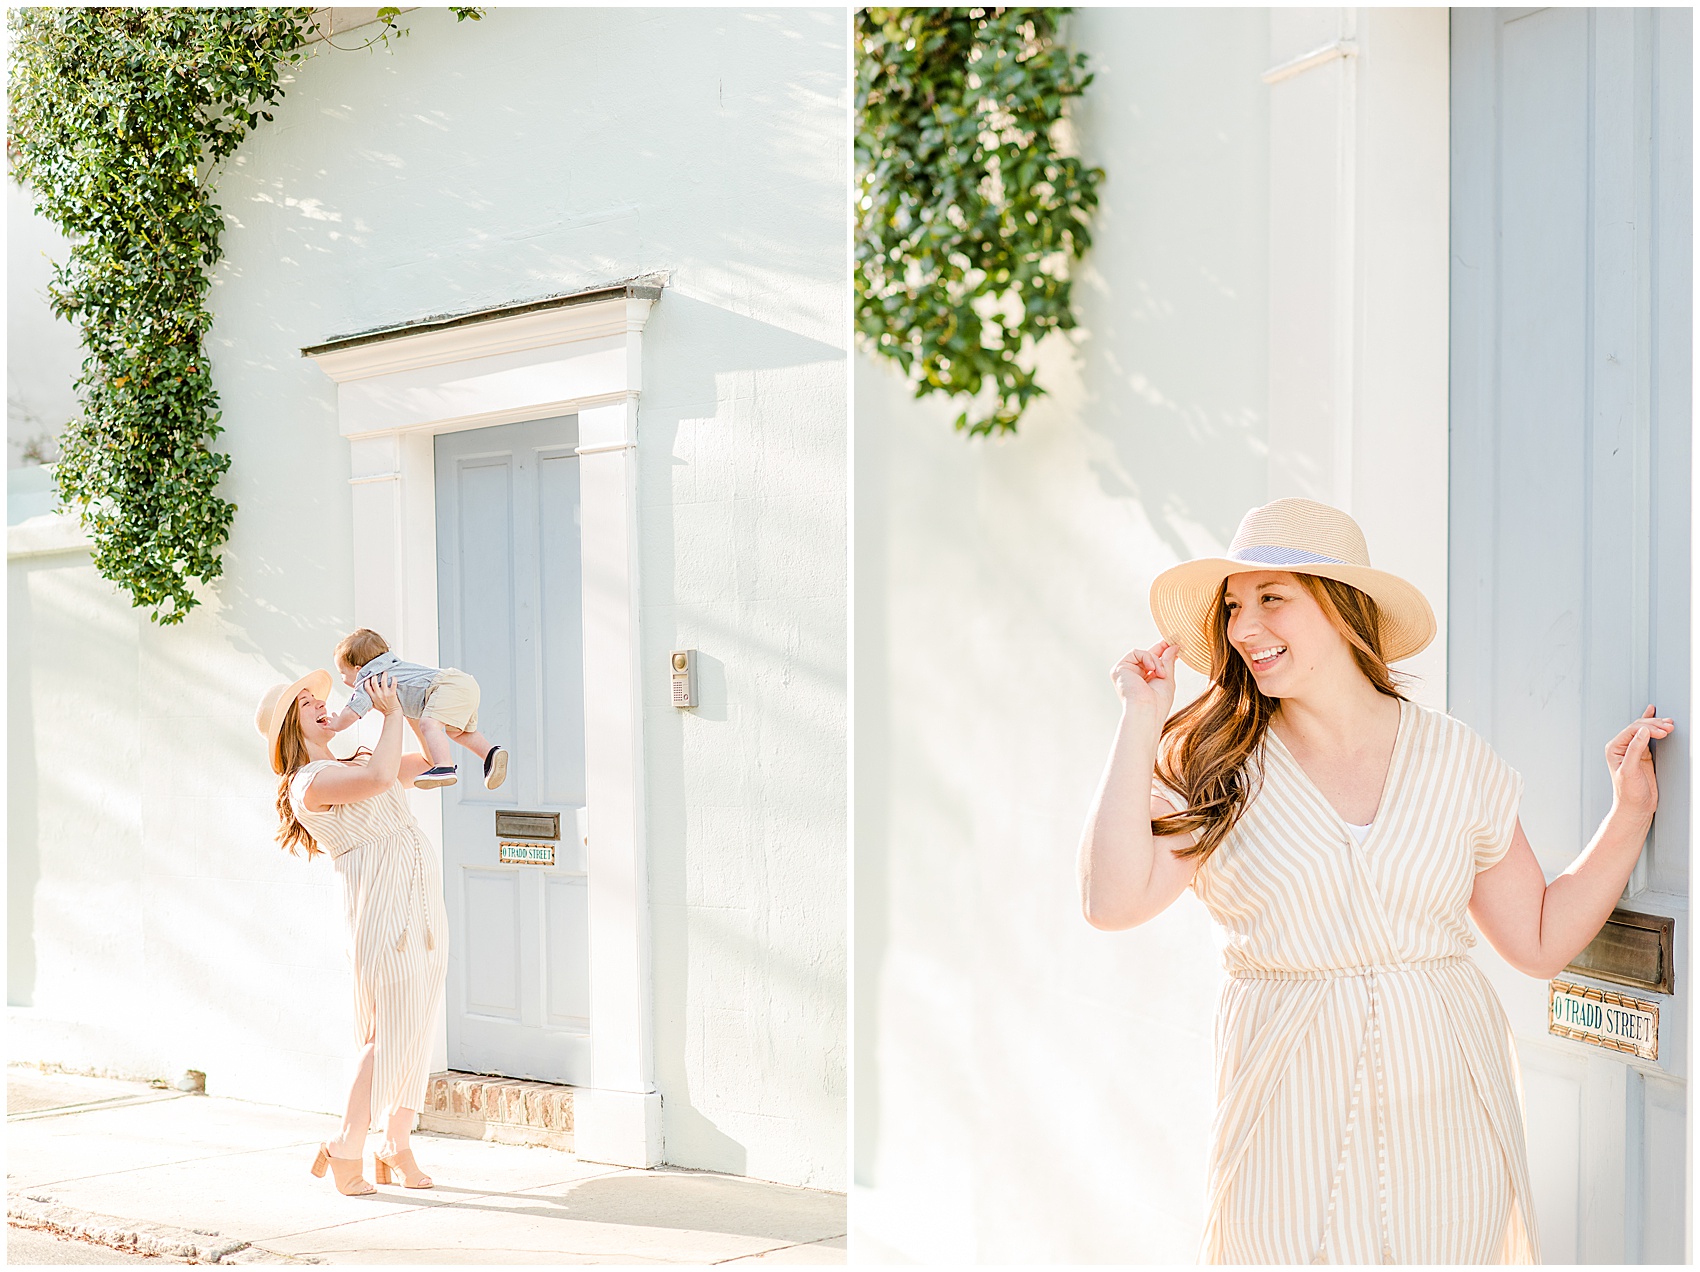 south of broad downtown Charlestion Folly Beach charleston wedding photographer session Lowcountry Charleston SC wedding Photographer_1990.jpg